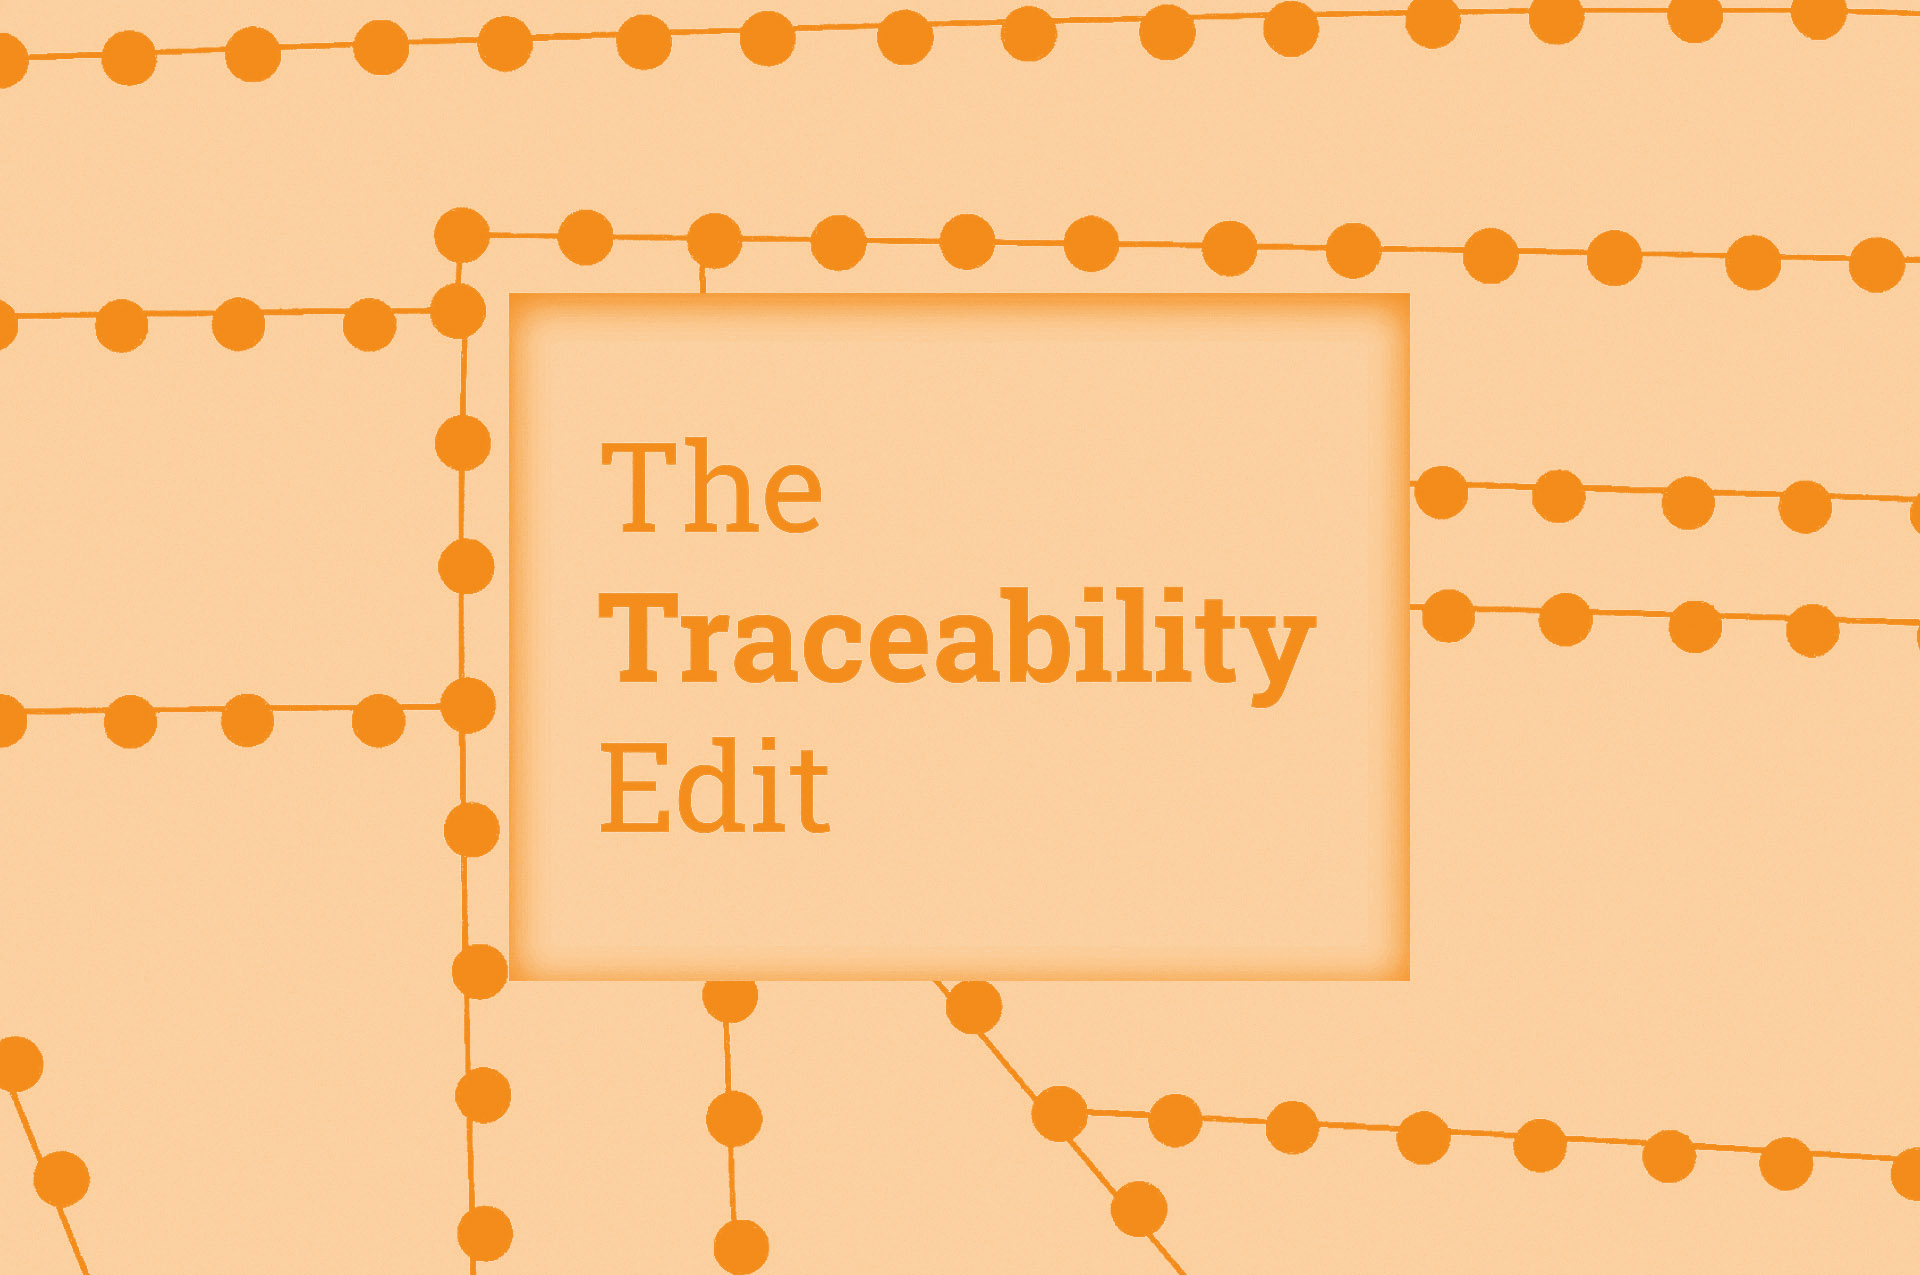 Traceability News to Read from August